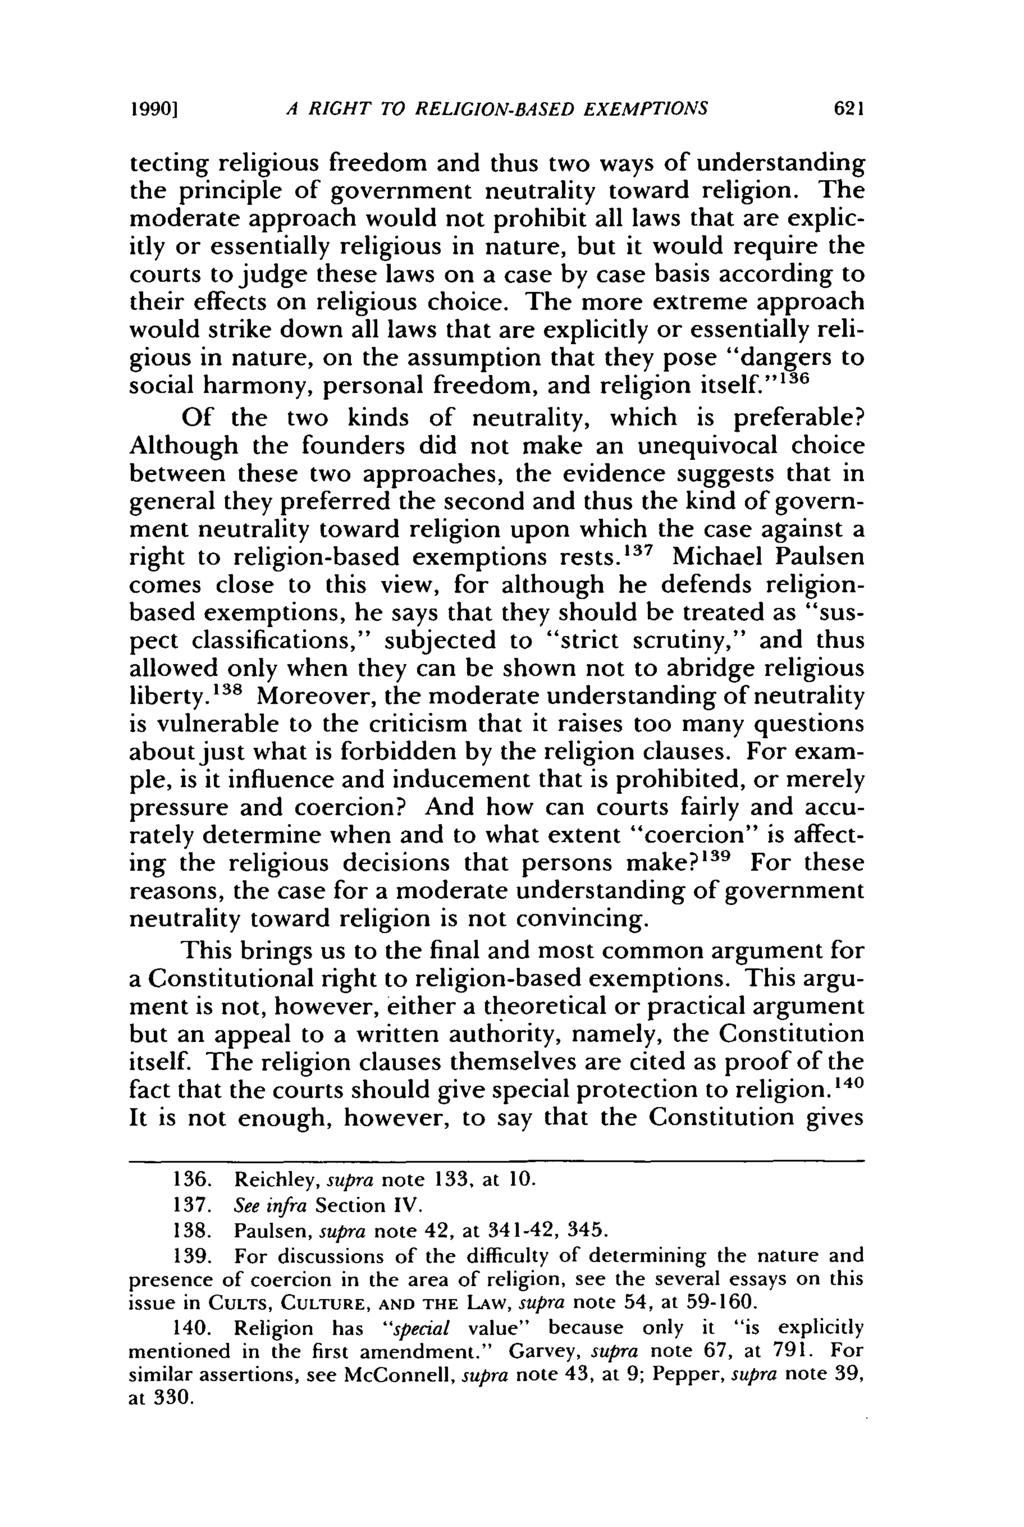 1990] A RIGHT TO RELIGION-BASED EXEMPTIONS tecting religious freedom and thus two ways of understanding the principle of government neutrality toward religion.